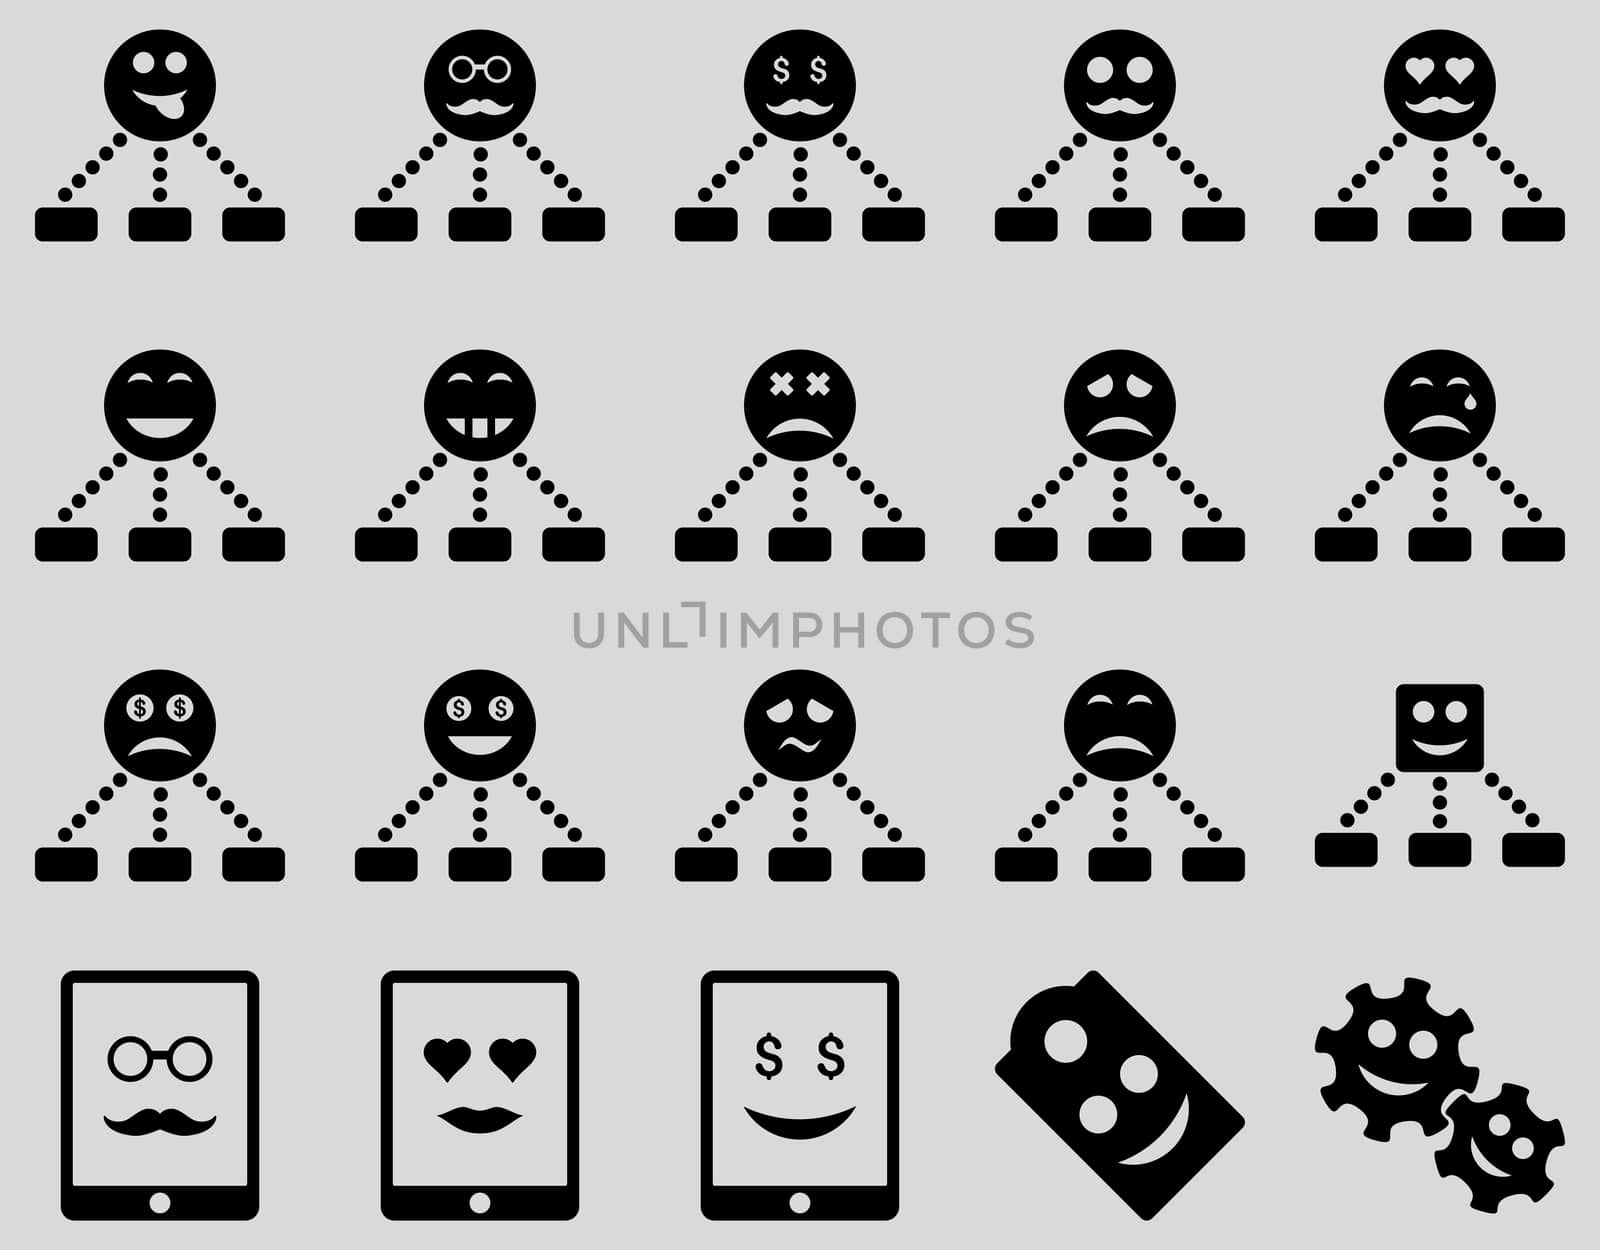 Smile, emotion, relations and tablet icons. Glyph set style is flat images, black symbols, isolated on a light gray background.